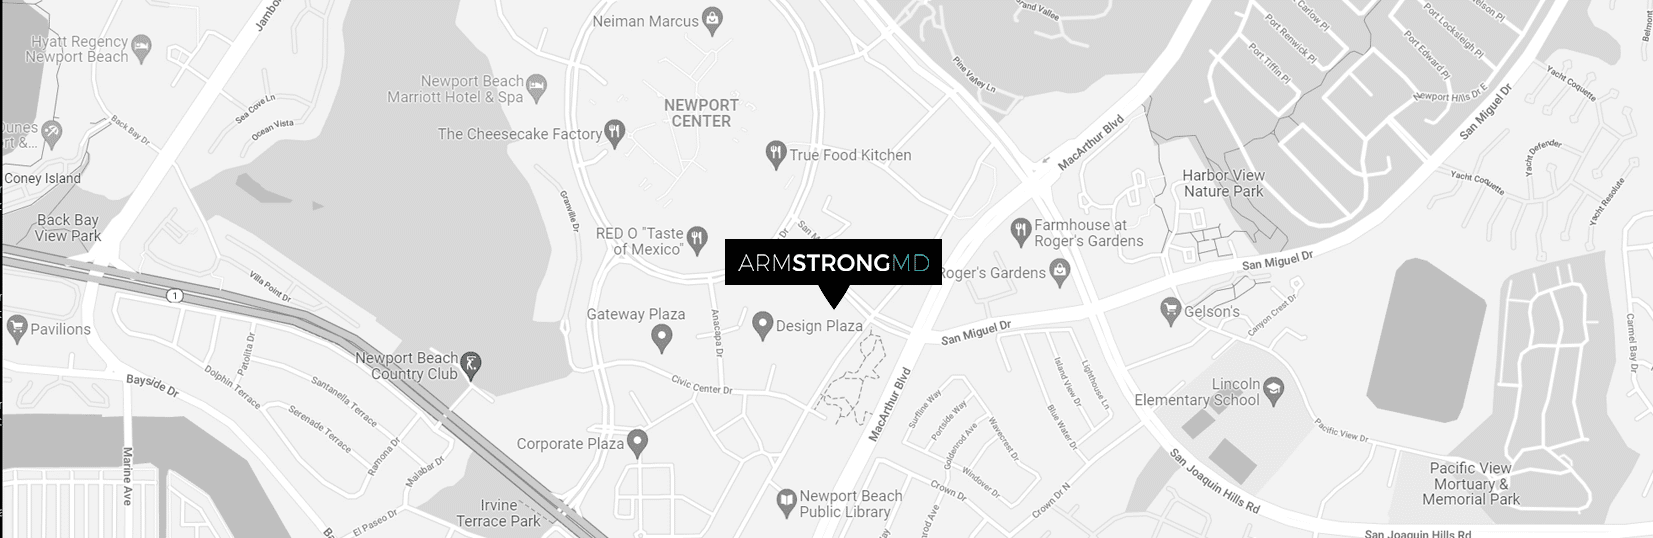 Armstrong MD uses state-of-the-art technologies to help people with cosmetic and dermatology needs. Contact us today to learn more!